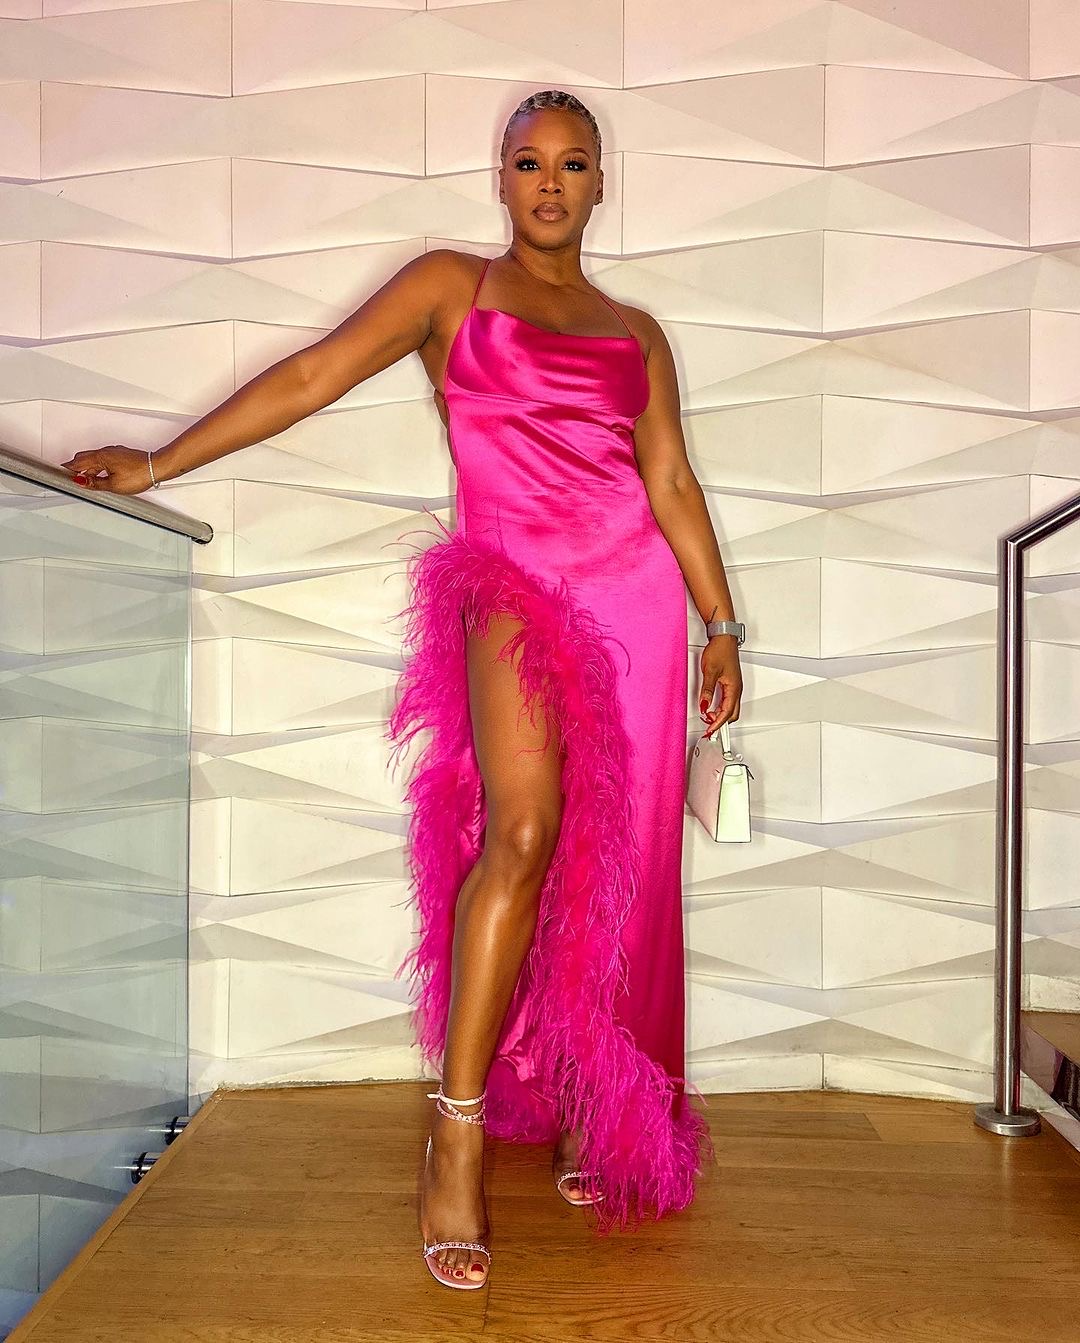 Mielle Organics CEO Monique Rodriguez Celebrated Her 40th Birthday in a Pink Custom Nicole Felicia Gown with Rene Caovilla Heels to her Cirque Du Moleil Theme Party More 13